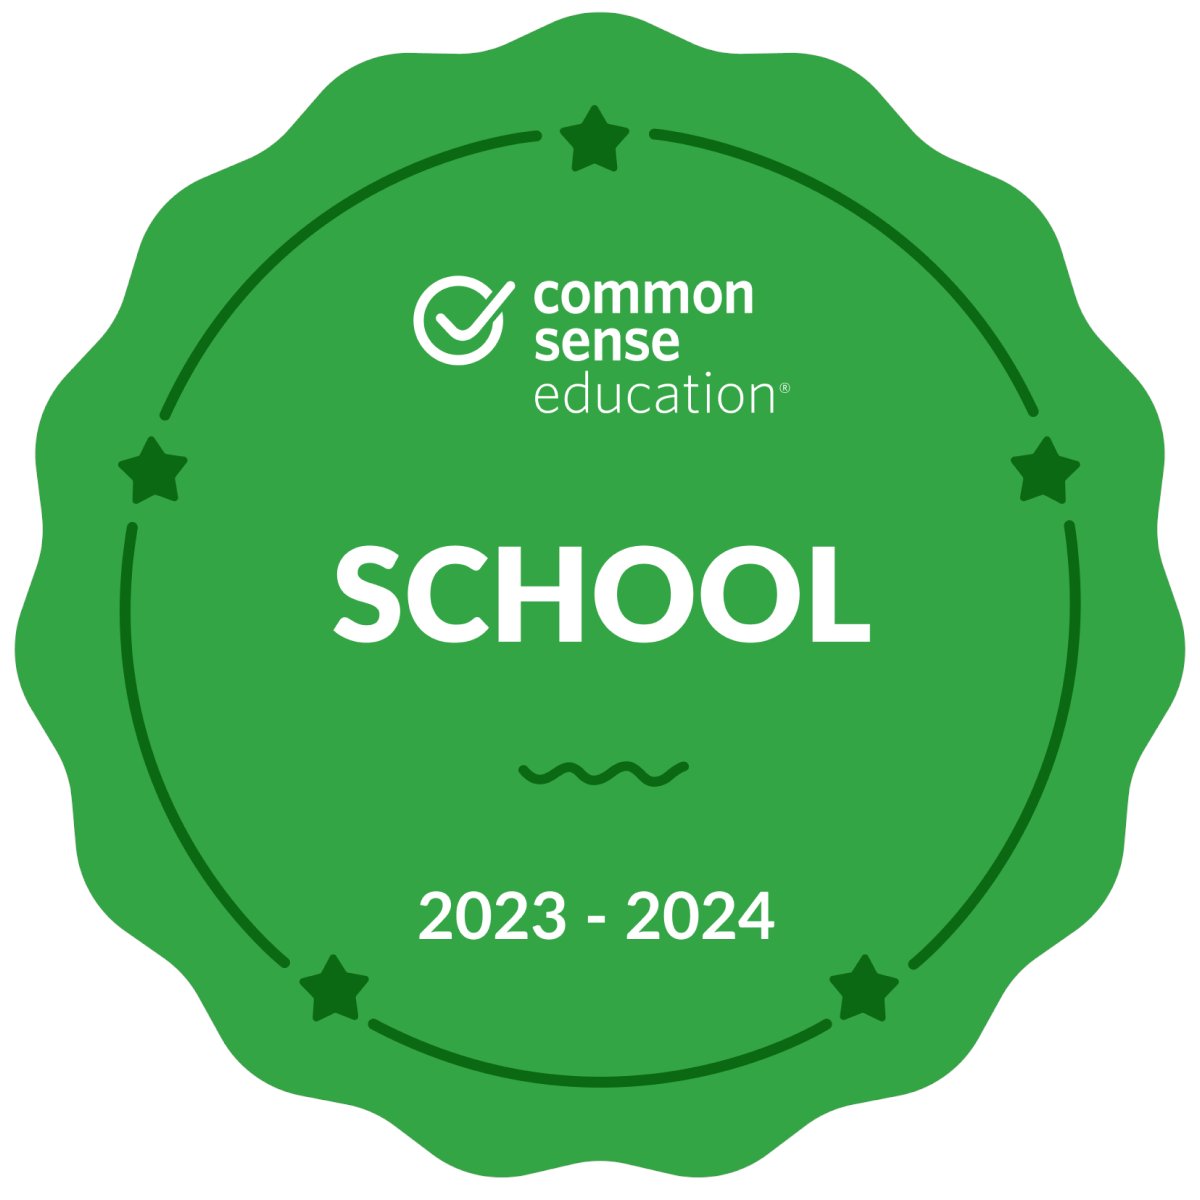 We are proud to announce that we are officially a Common Sense Education Recognized School for the 23-24 School Year! #CommonSenseSchool @rhes_library #digitalcitizenship